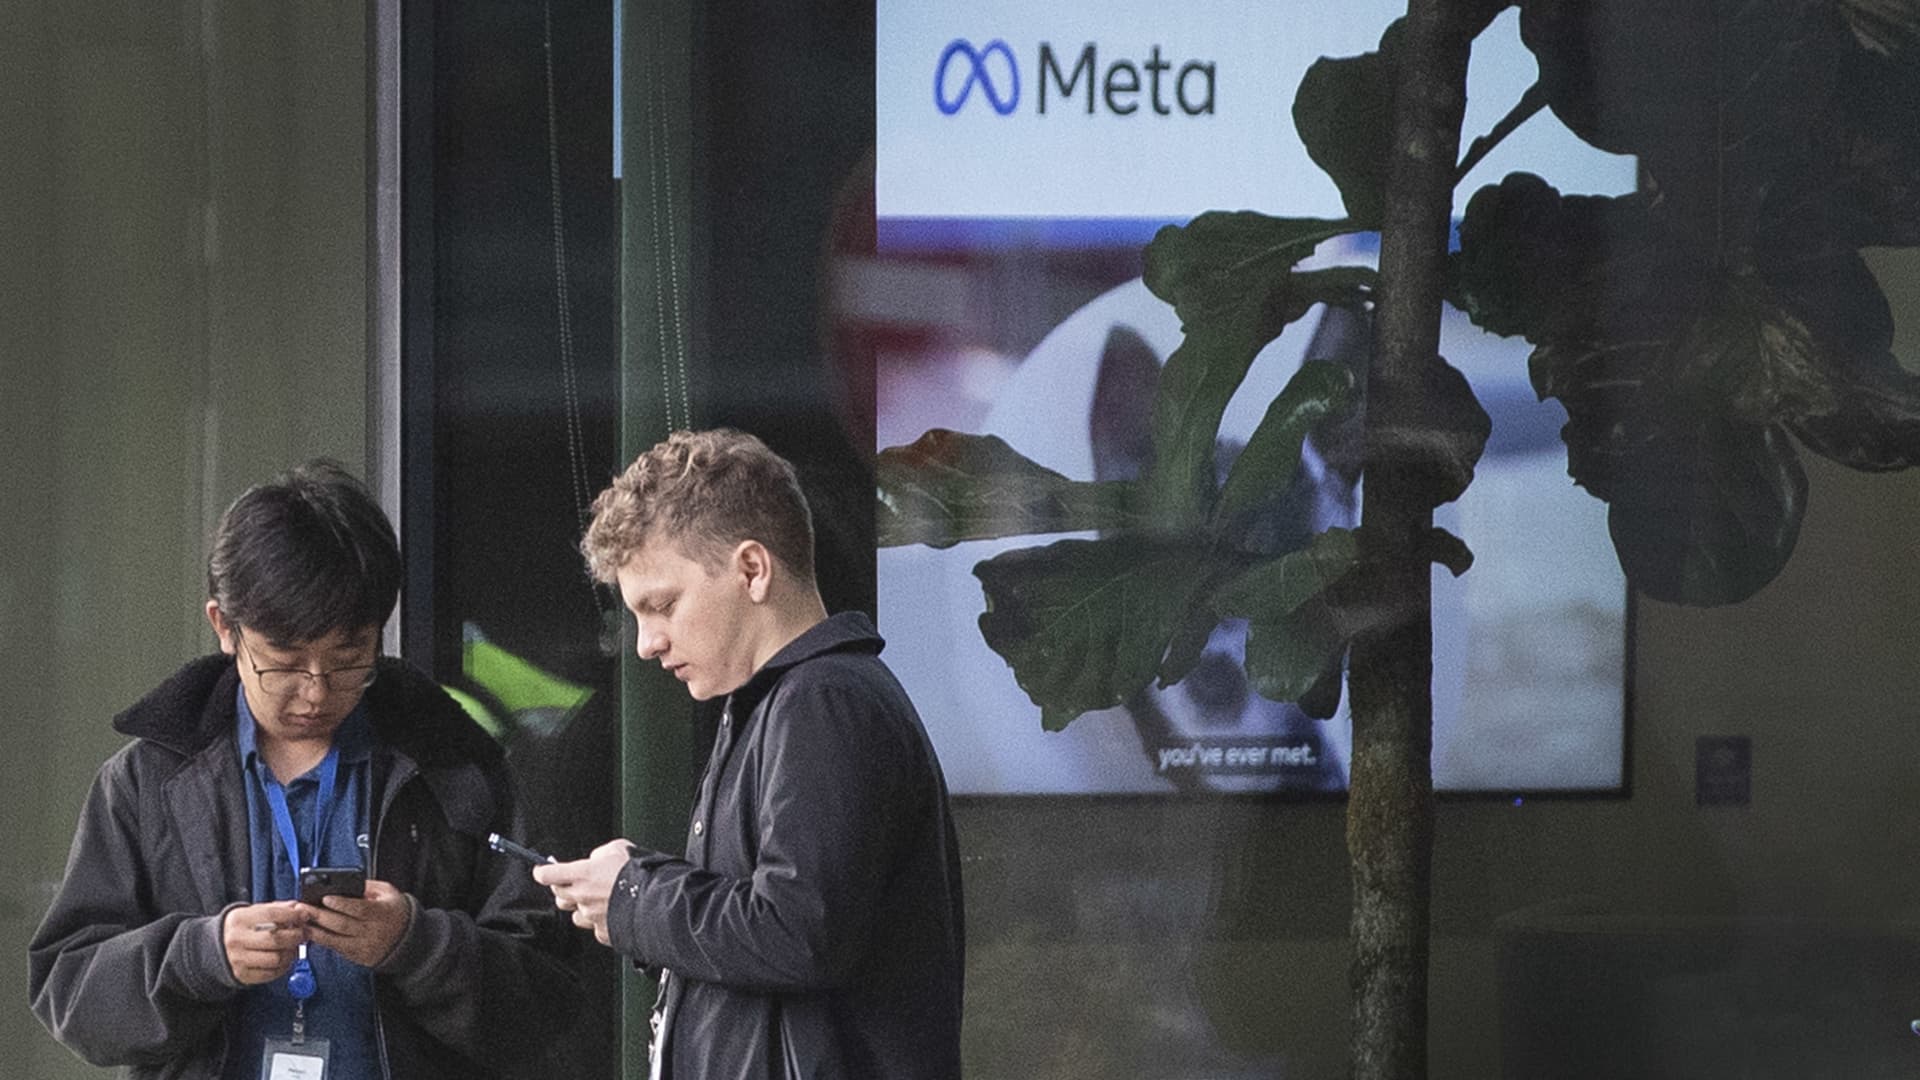 People using their mobile phones outside the offices of Meta, the parent company of Facebook and Instagram, in King's Cross, London.